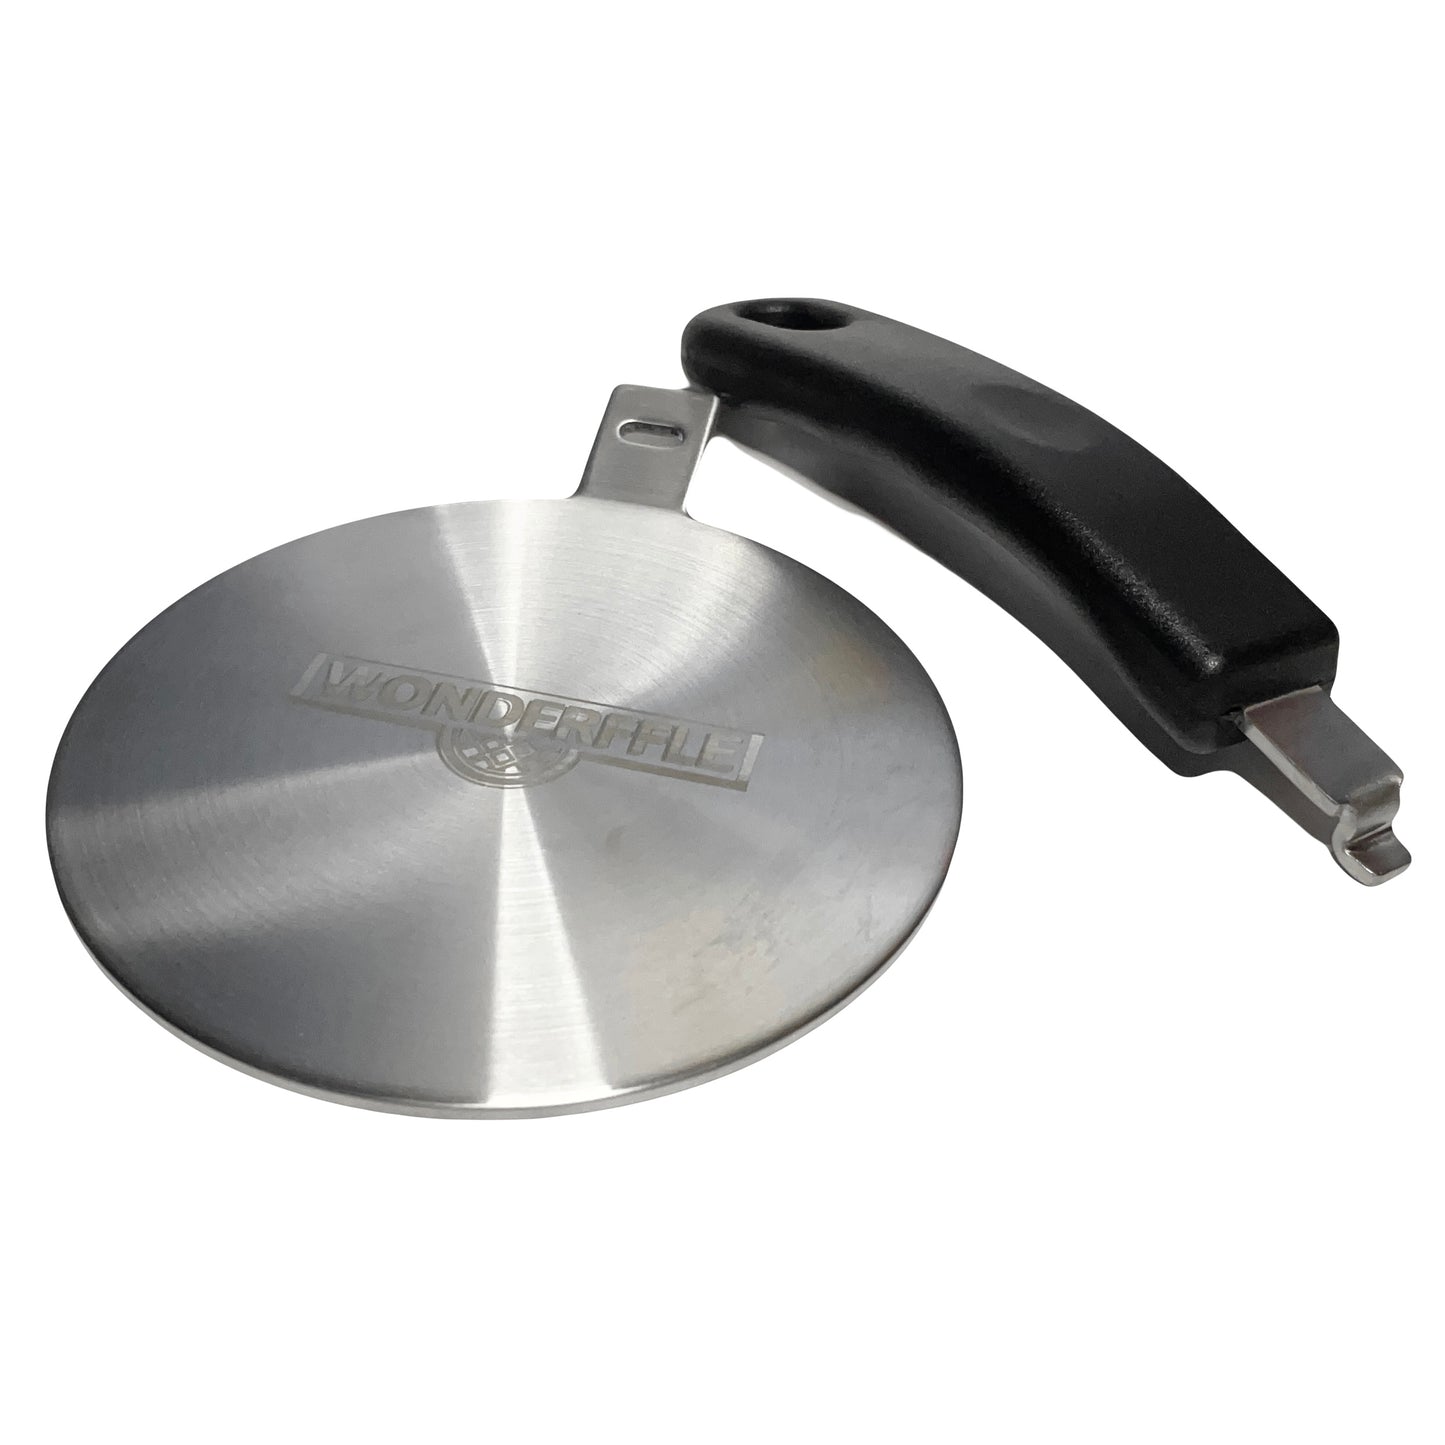 Induction Plate Adapter